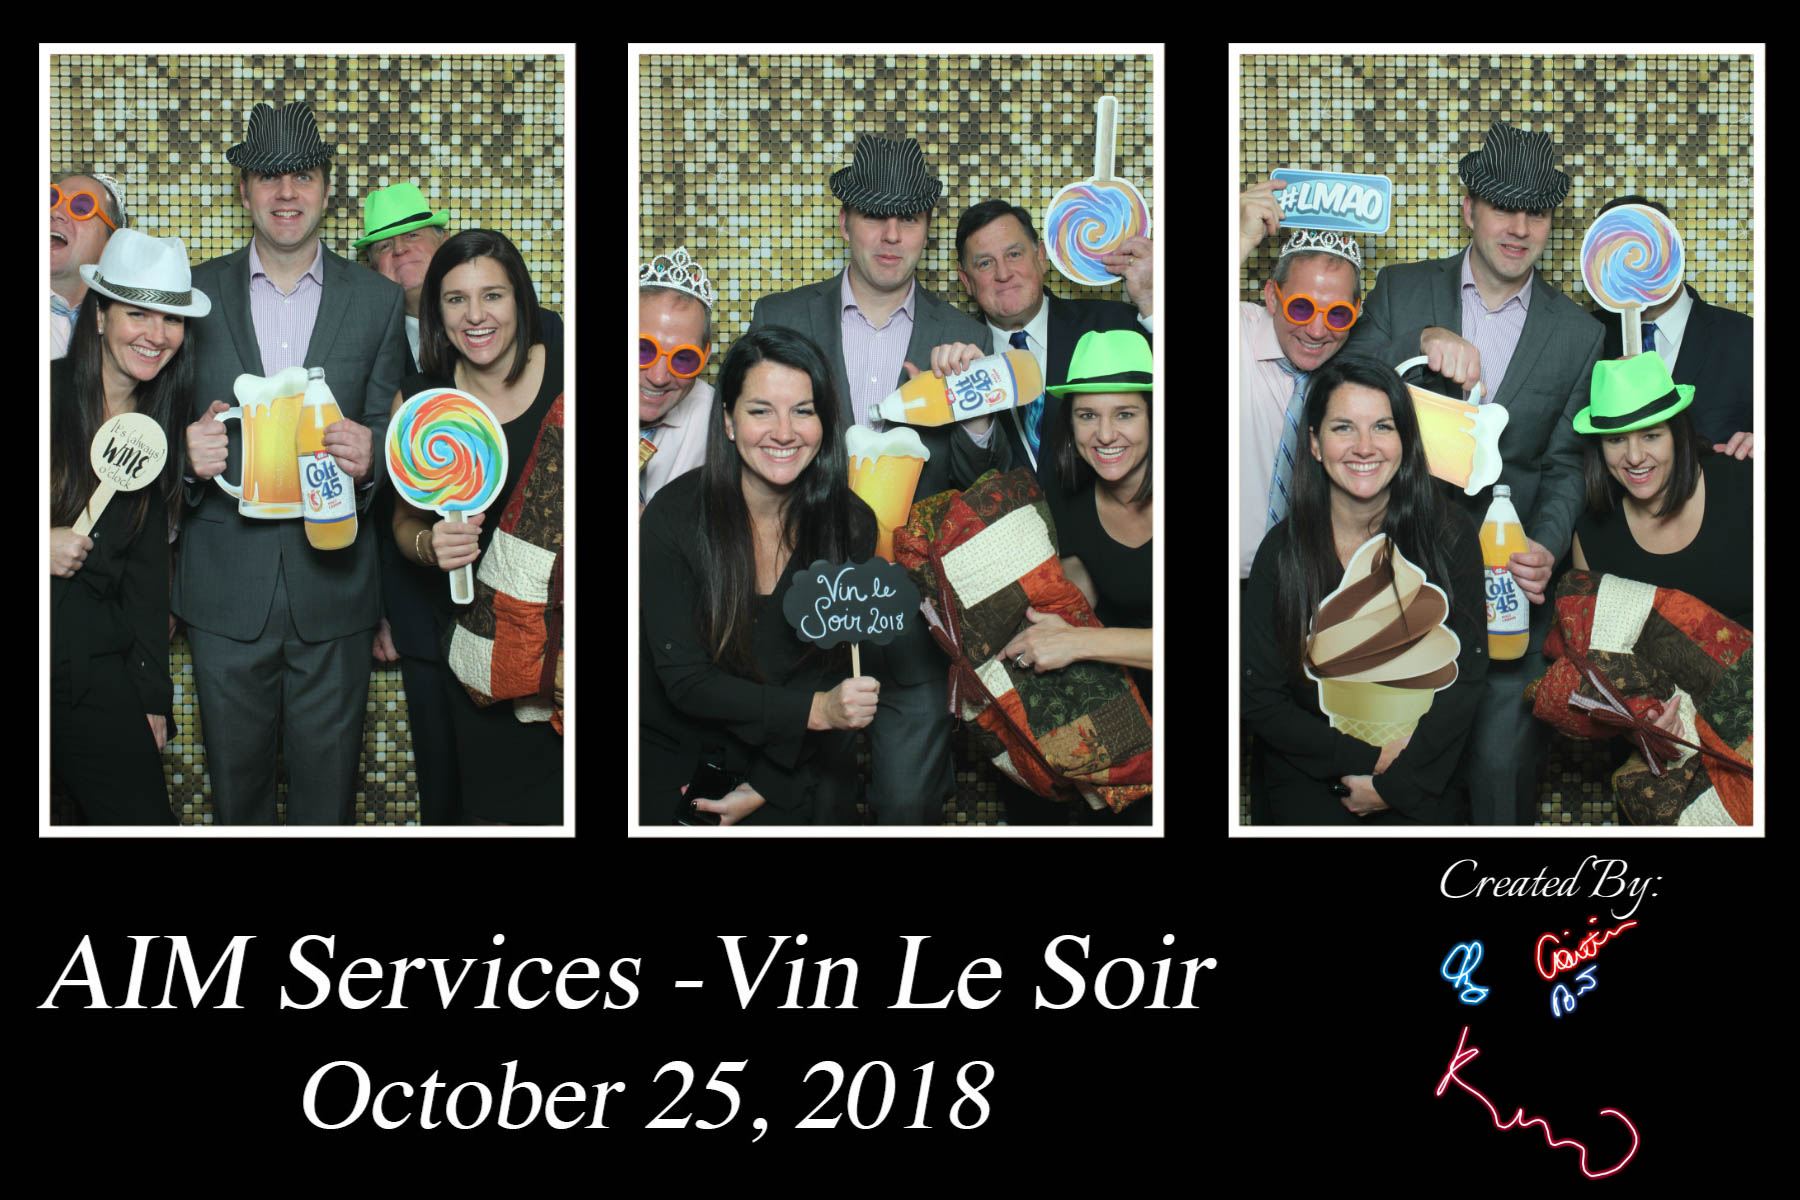 AIM Services, Inc. photobooth picture